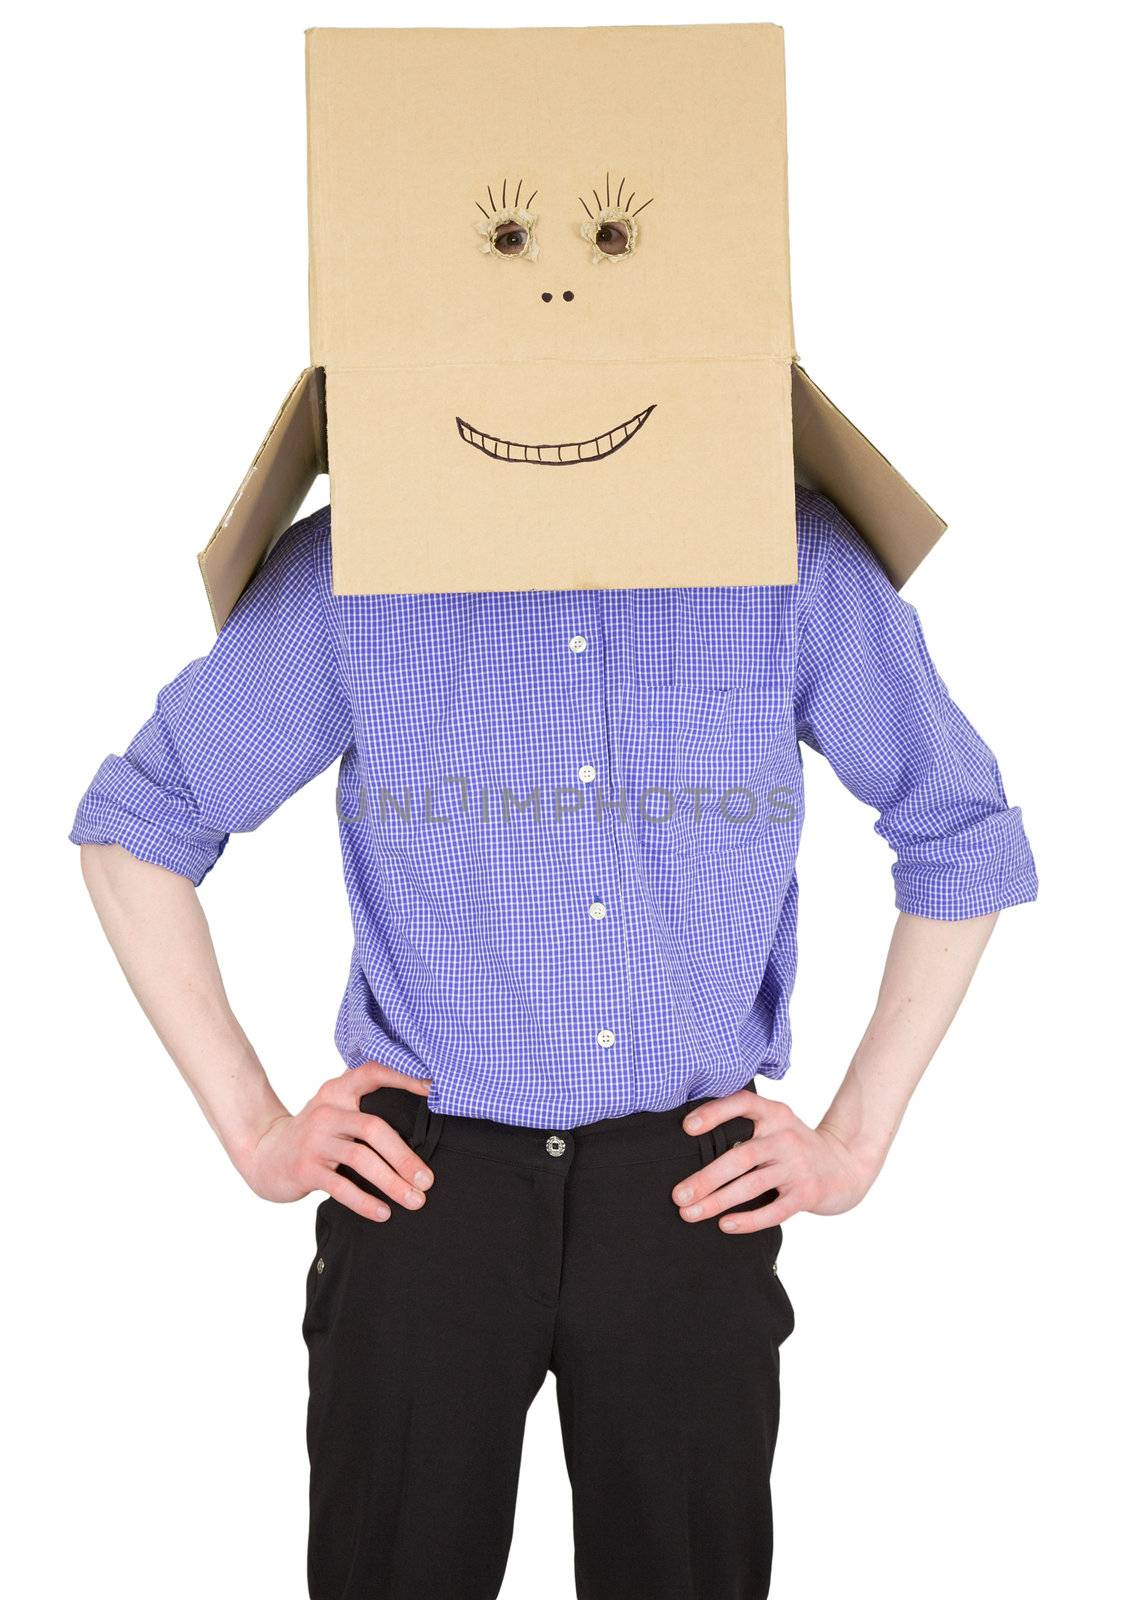 Man with carton box instead of head by pzaxe